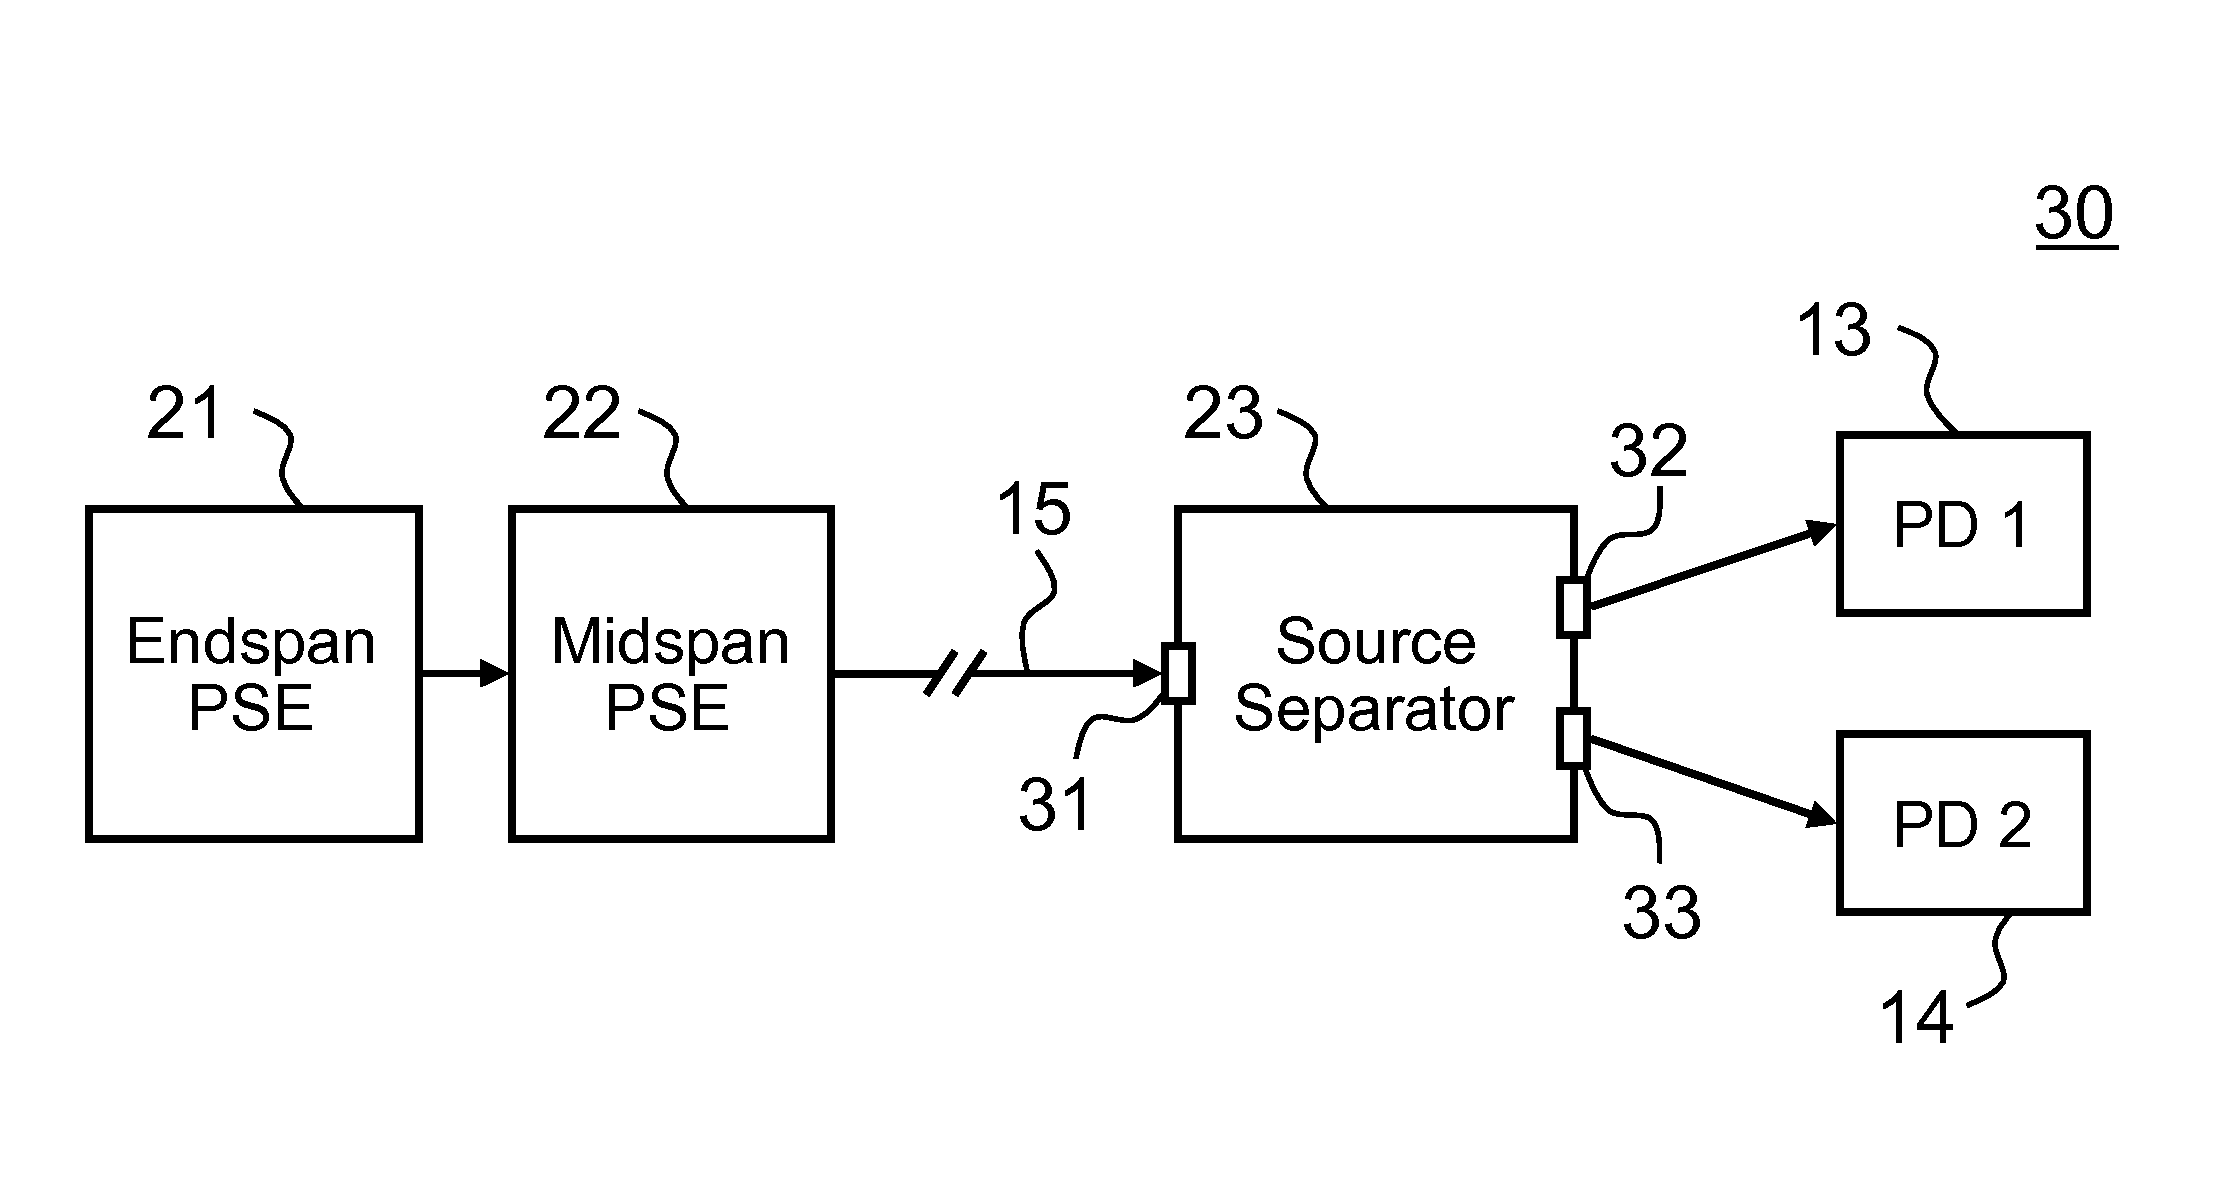 Source Separator for Power over Ethernet Systems